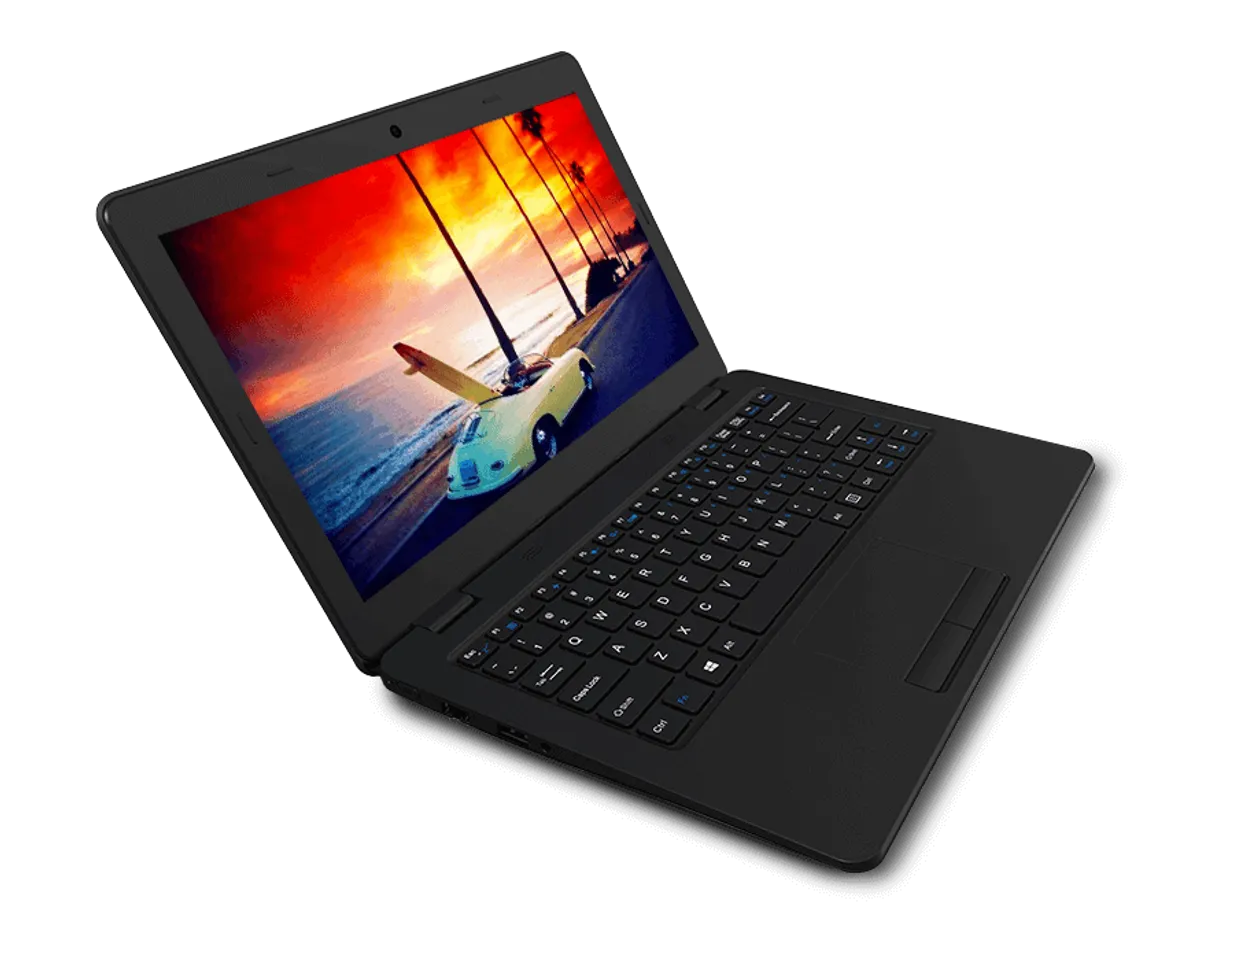 Micromax Canvas LAPbook L1160 Notebook Review